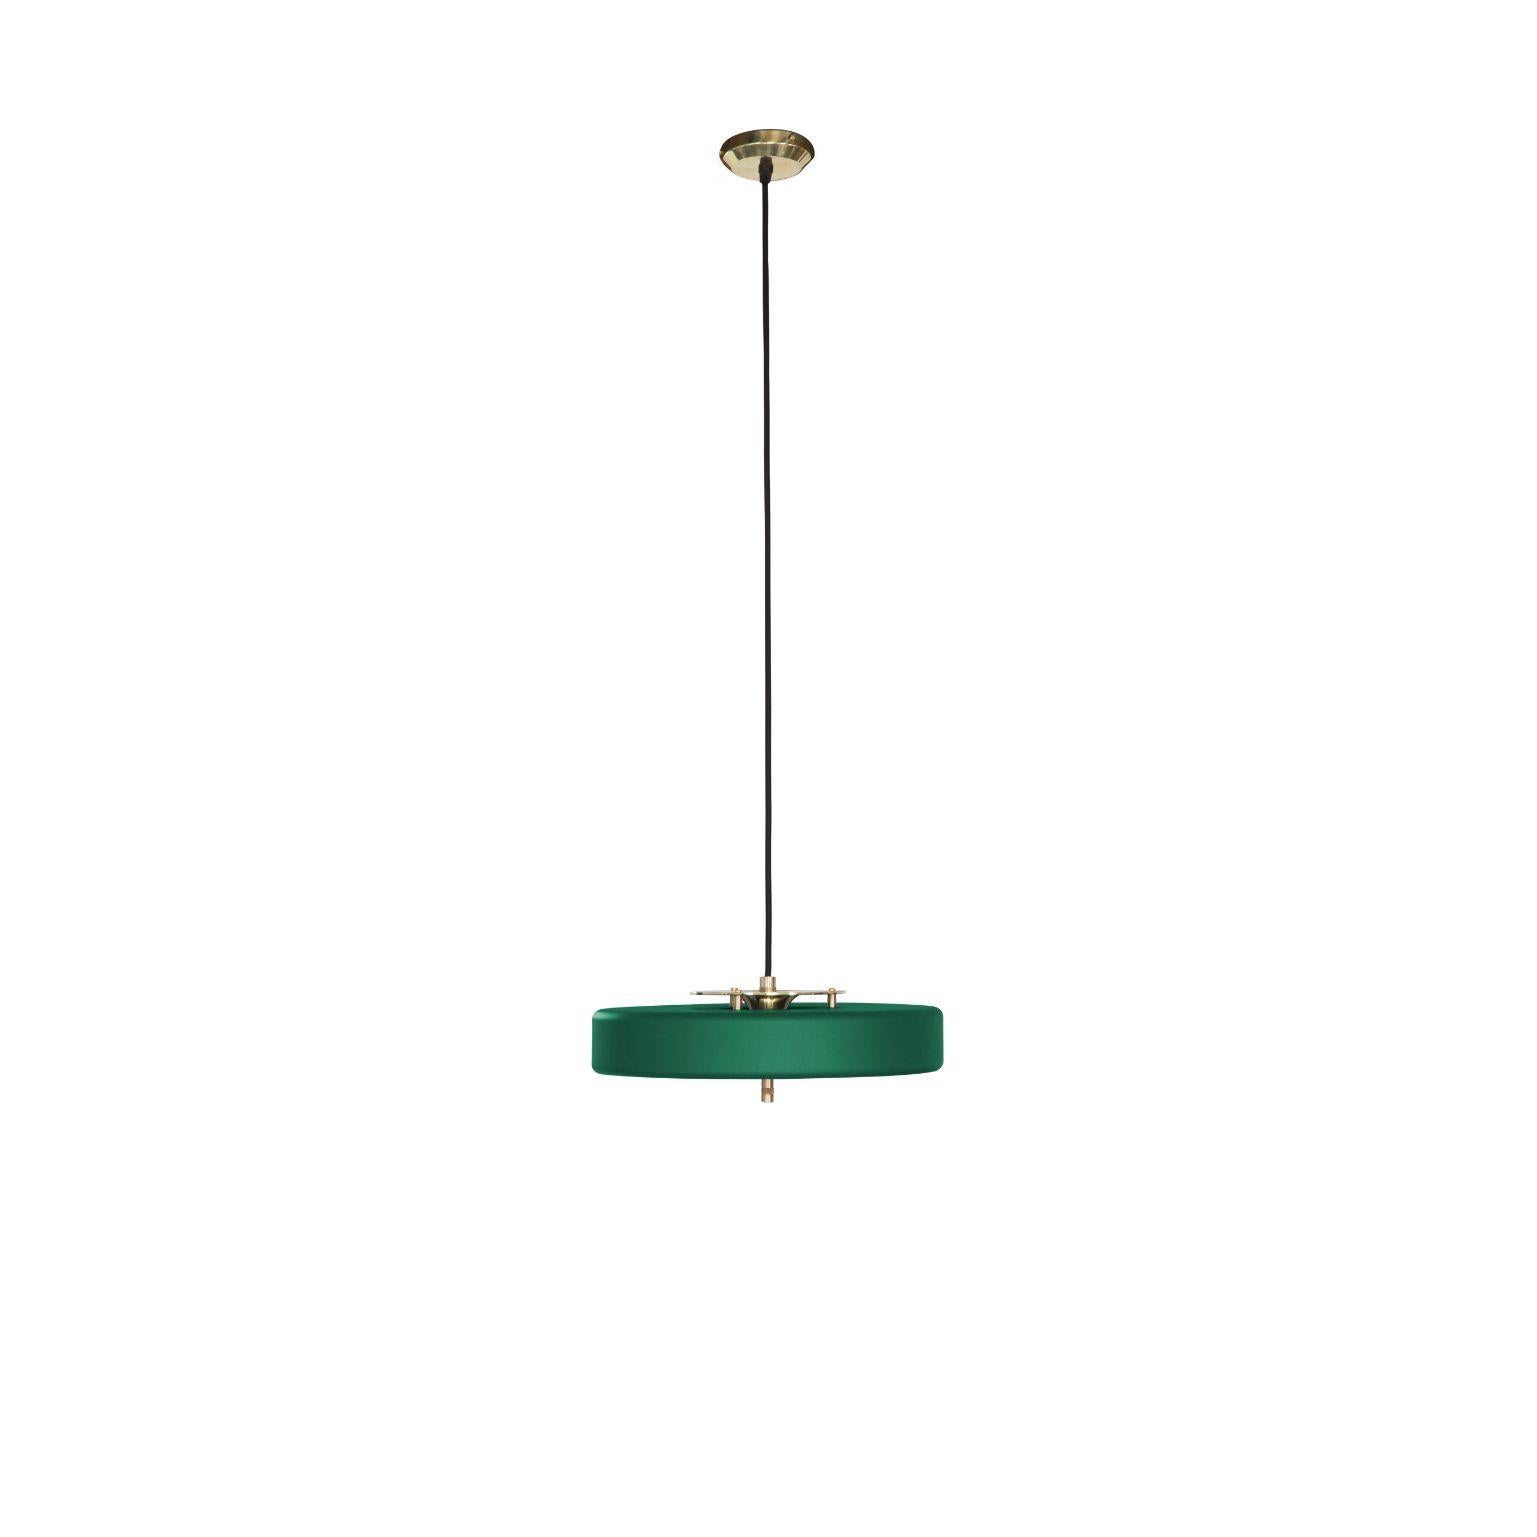 Revolve pendant light - brushed brass - green by Bert Frank
Dimensions: 60-200 x 35 x 11 cm
Materials: Brass, steel

Also available in polished brass

When Adam Yeats and Robbie Llewellyn founded Bert Frank in 2013 it was a meeting of minds